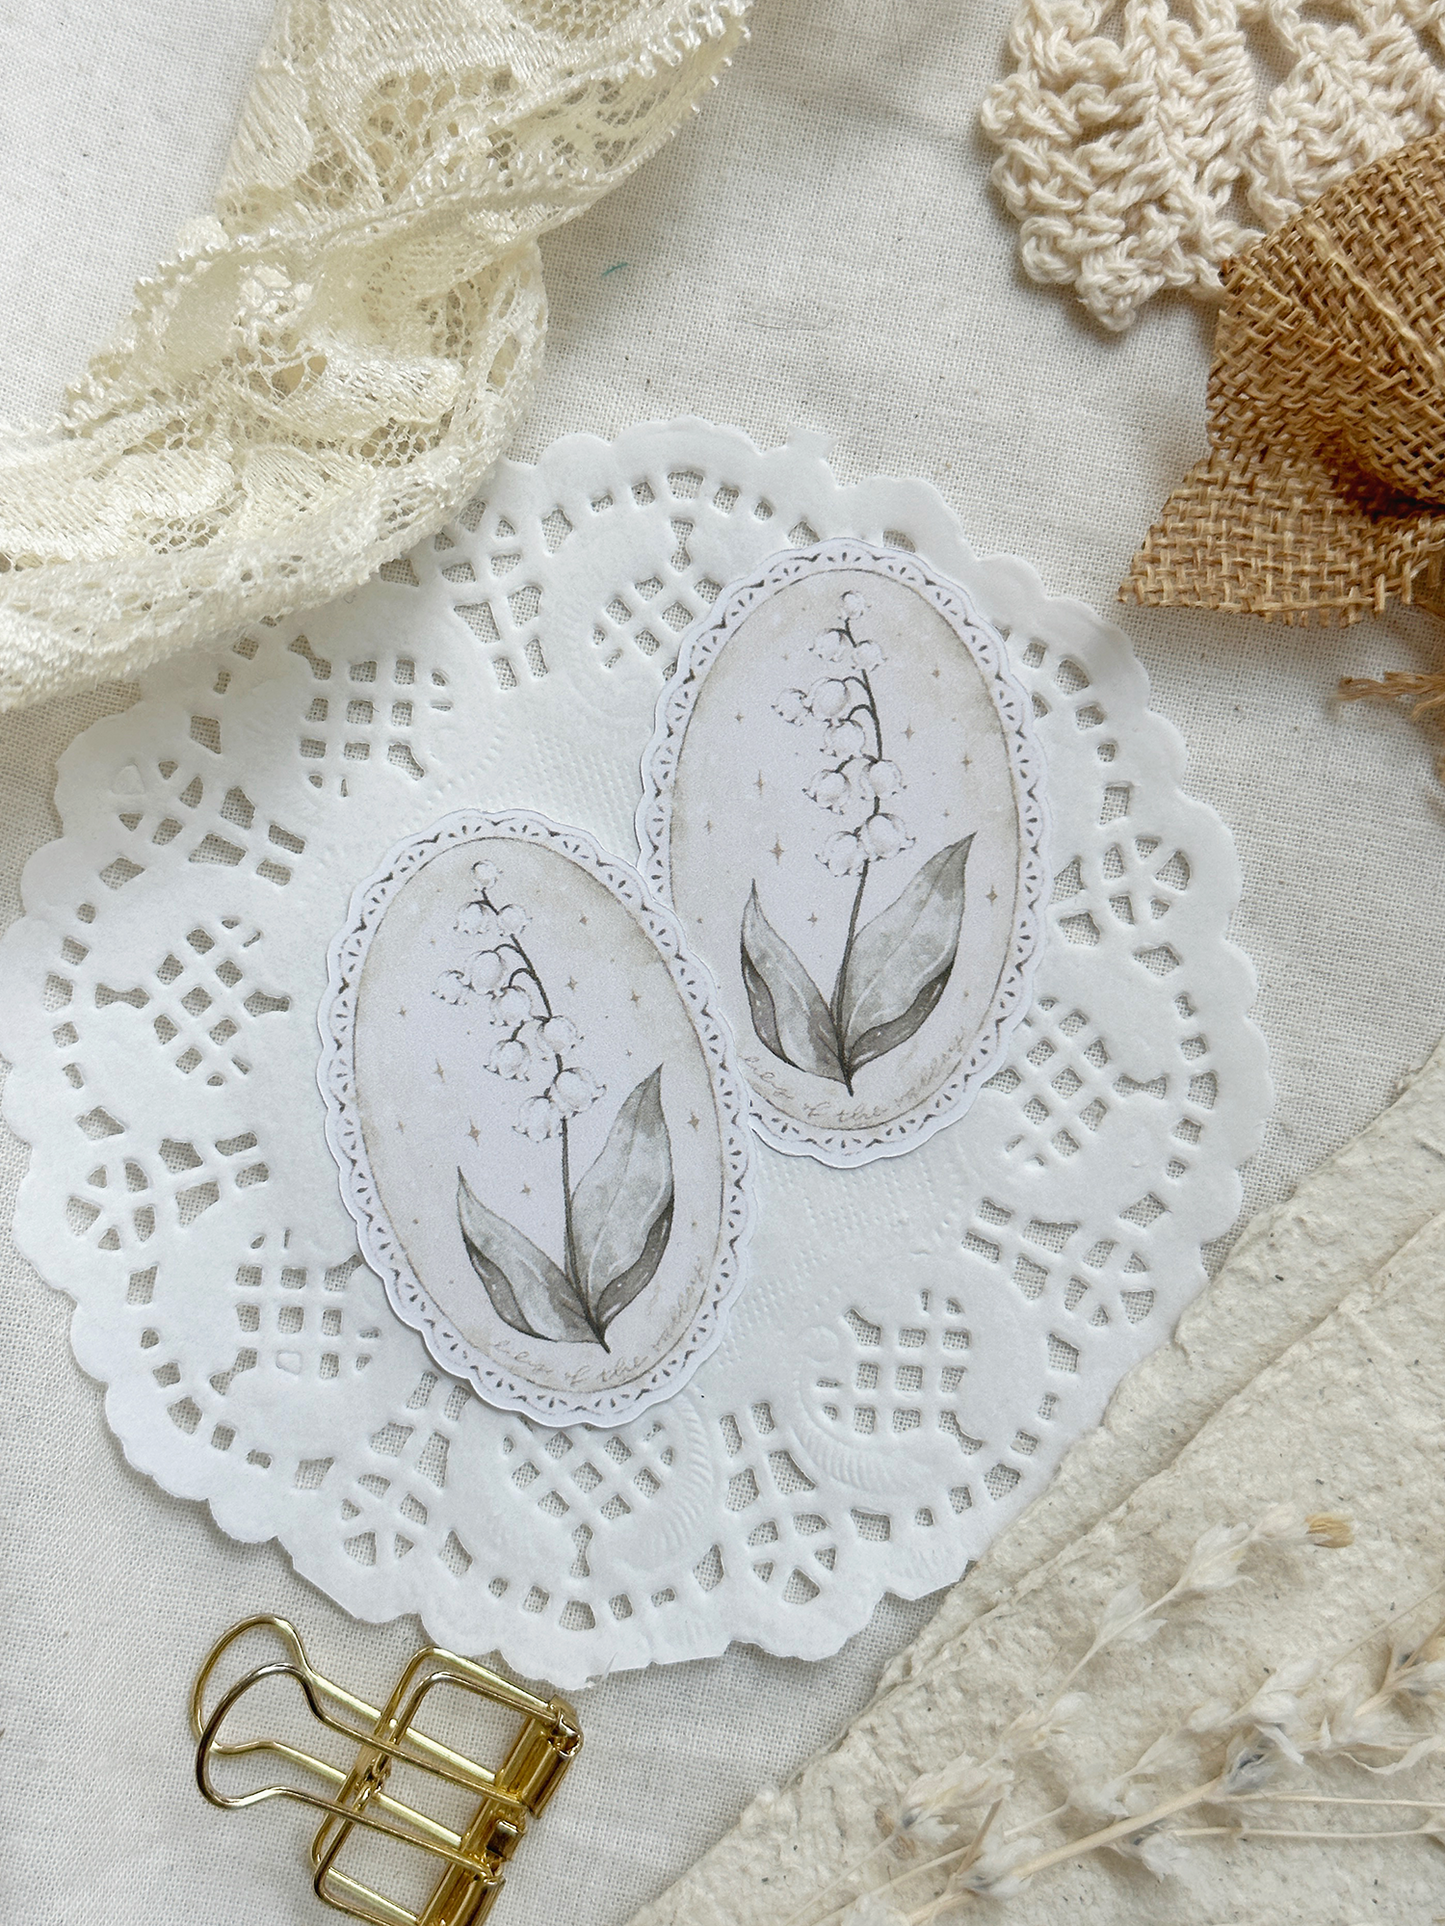 lily of the valley doily sticker flake 1.5x2